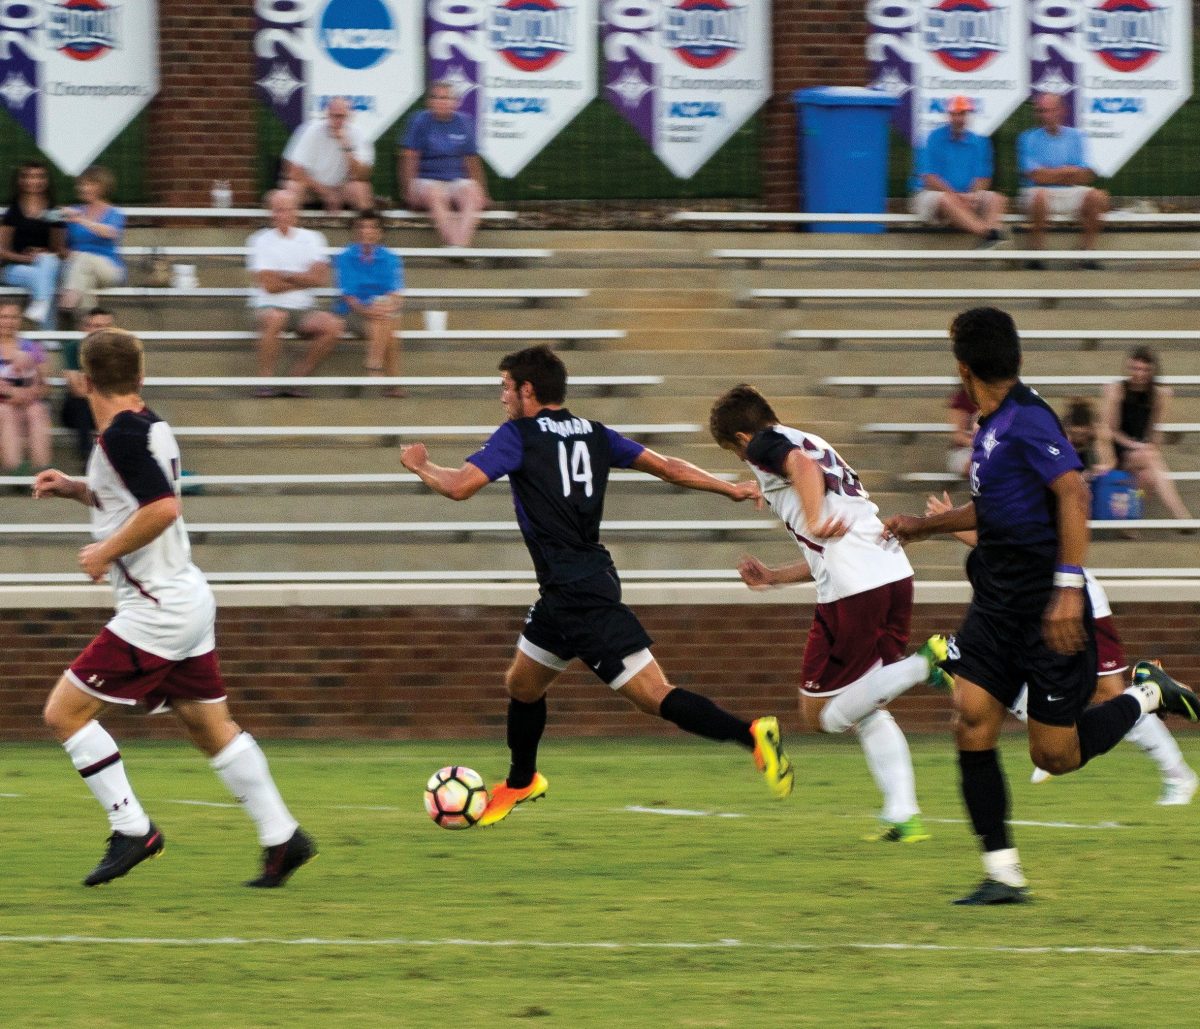 Paladins+Find+Their+Stride%3A+Men%26%238217%3Bs+Soccer+Team+Looks+to+Gain+Momentum+From+Win+Over+Nationally+Ranked+Kentucky